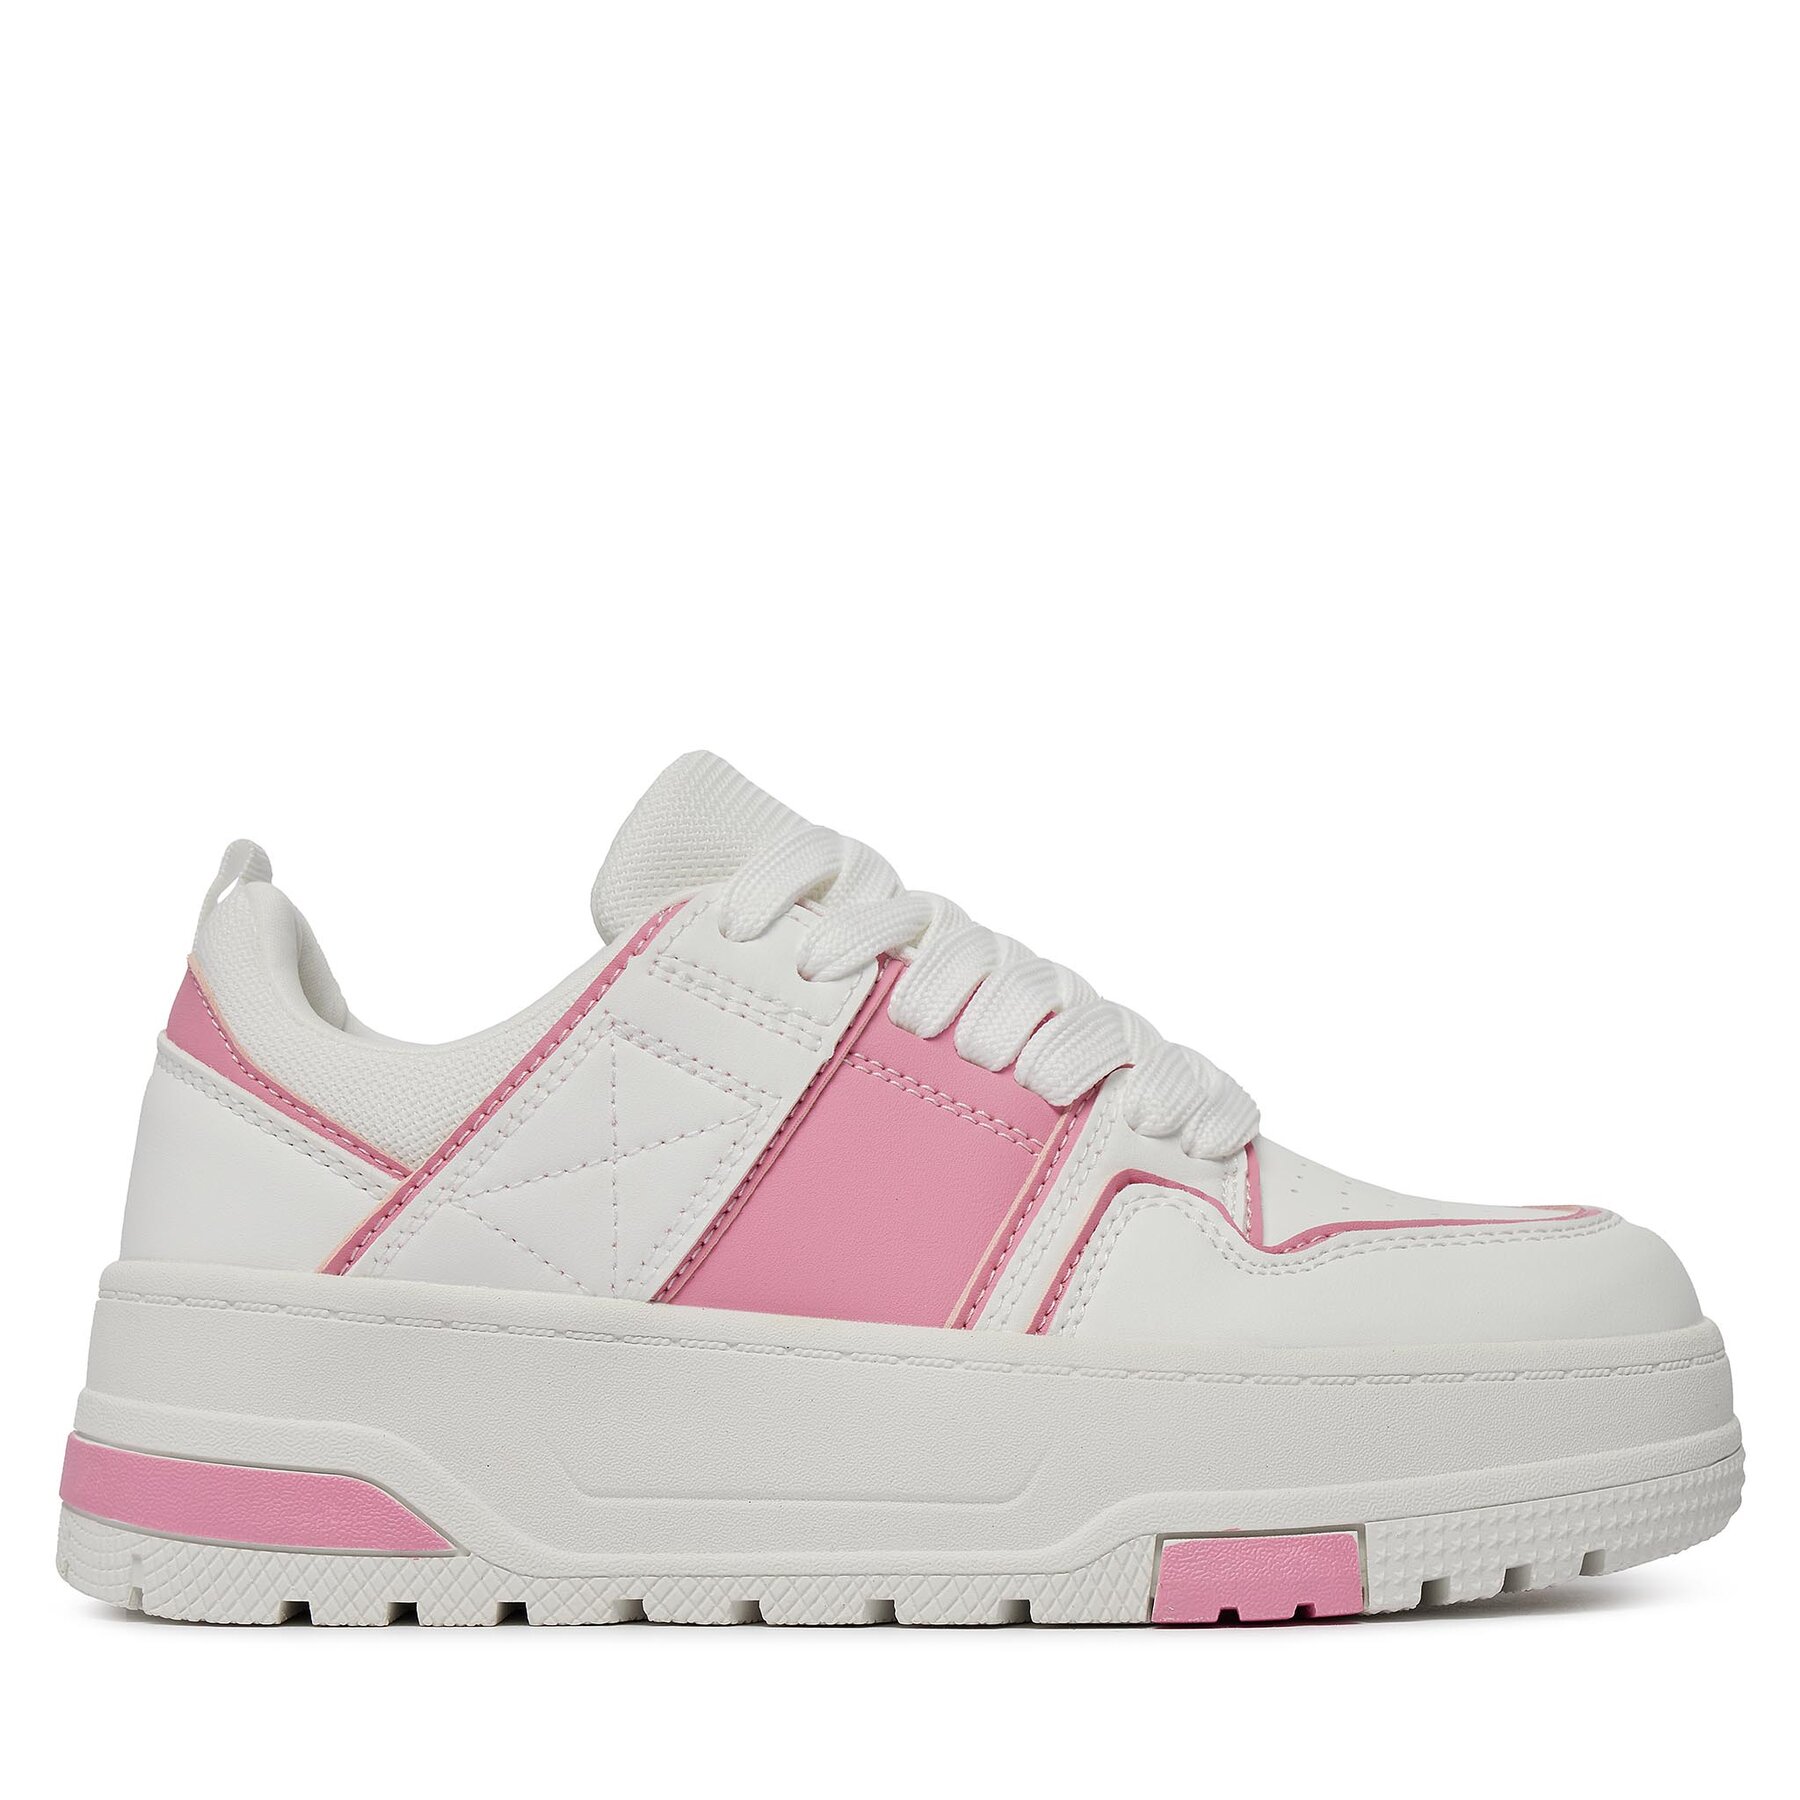 Sneakers Call It Spring Keisha 13703575 110 von Call It Spring